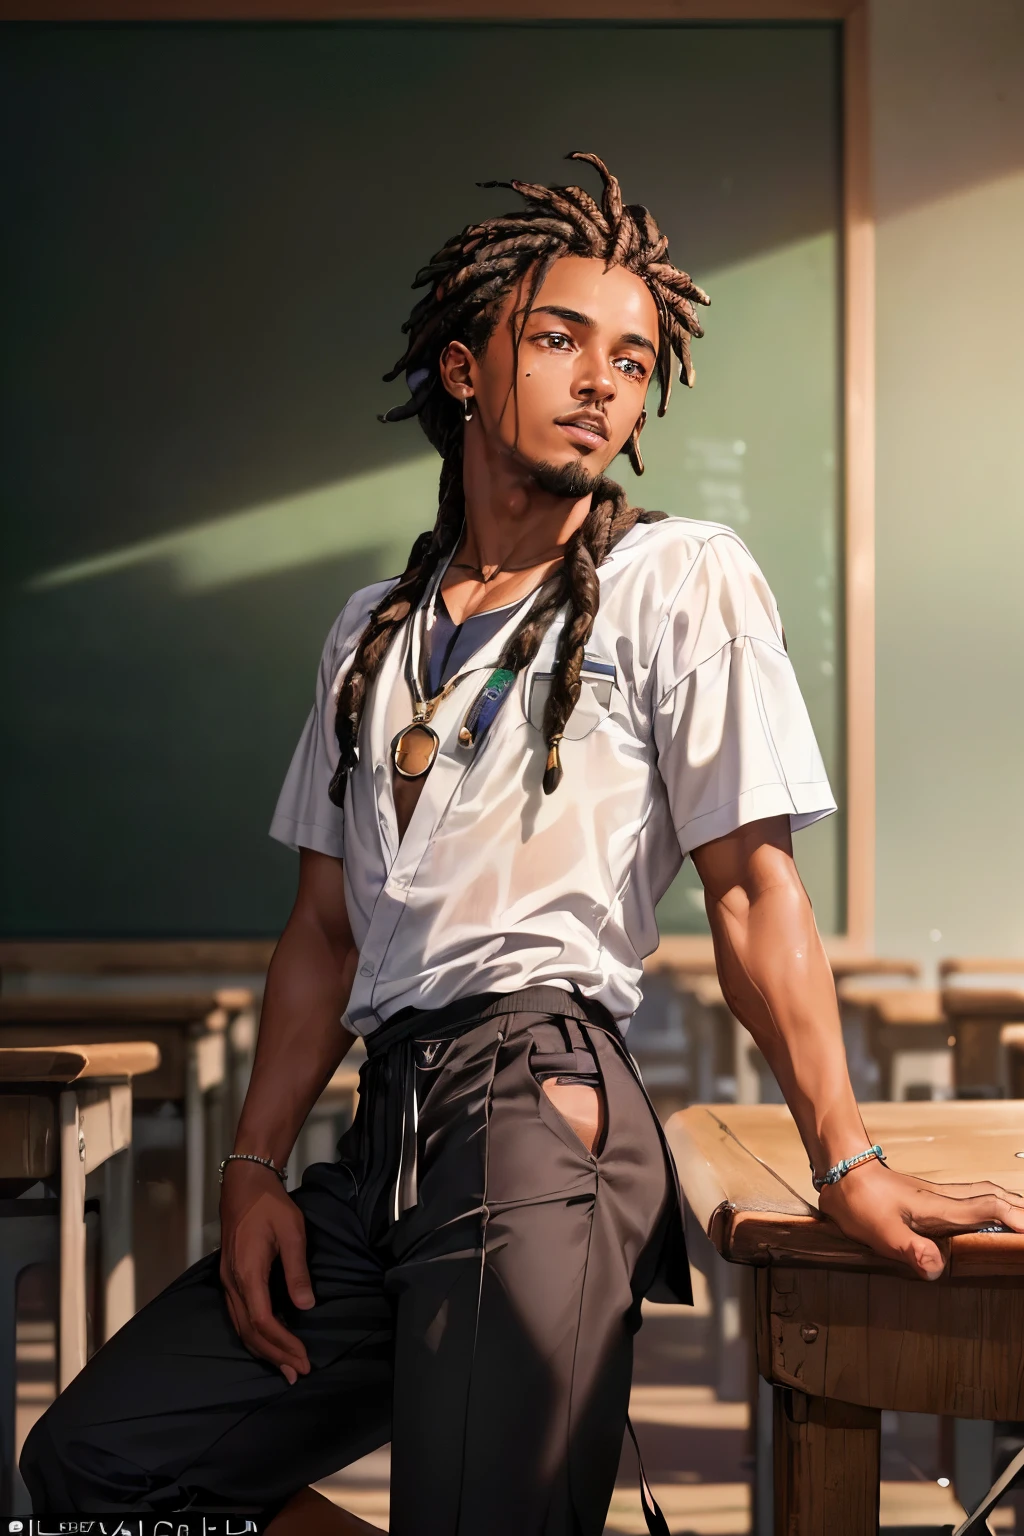 ((Mejor calidad): This image exhibits the highest level of quality, showcasing every detail in exceptional clarity and depth. It is an intricately crafted ((obra maestra)) that captures the essence of a ((detallado)) young man with perfection.

He is a slender, ((flaco)) ((chico negro)), adorned with ((rastas)), sitting ((recostado en el pupitre)). His flawless ((piel negra)) complexion stands out against the crisp background, his features framed by the adult world of the classroom. Worn casually, his ((uniforme escolar)) hangs loosely on his frame, revealing